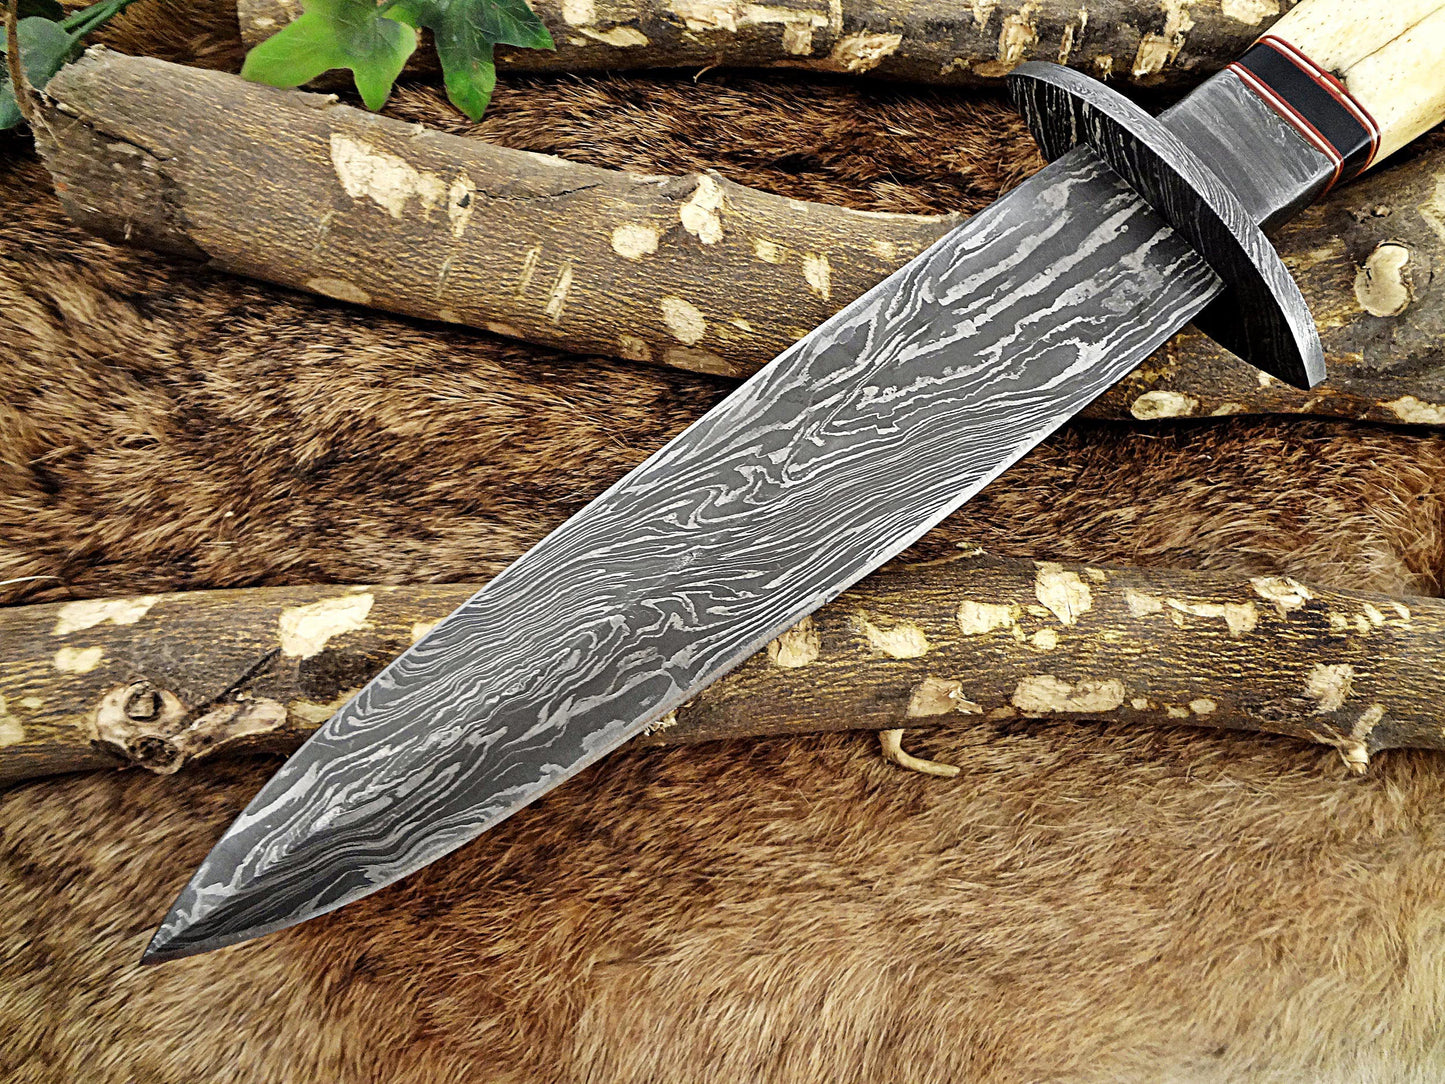 13 Inches long Damascus steel custom made hunting dagger Knife camel bone, Bull horn & bolster scale Hand Forged cow hide leather sheath